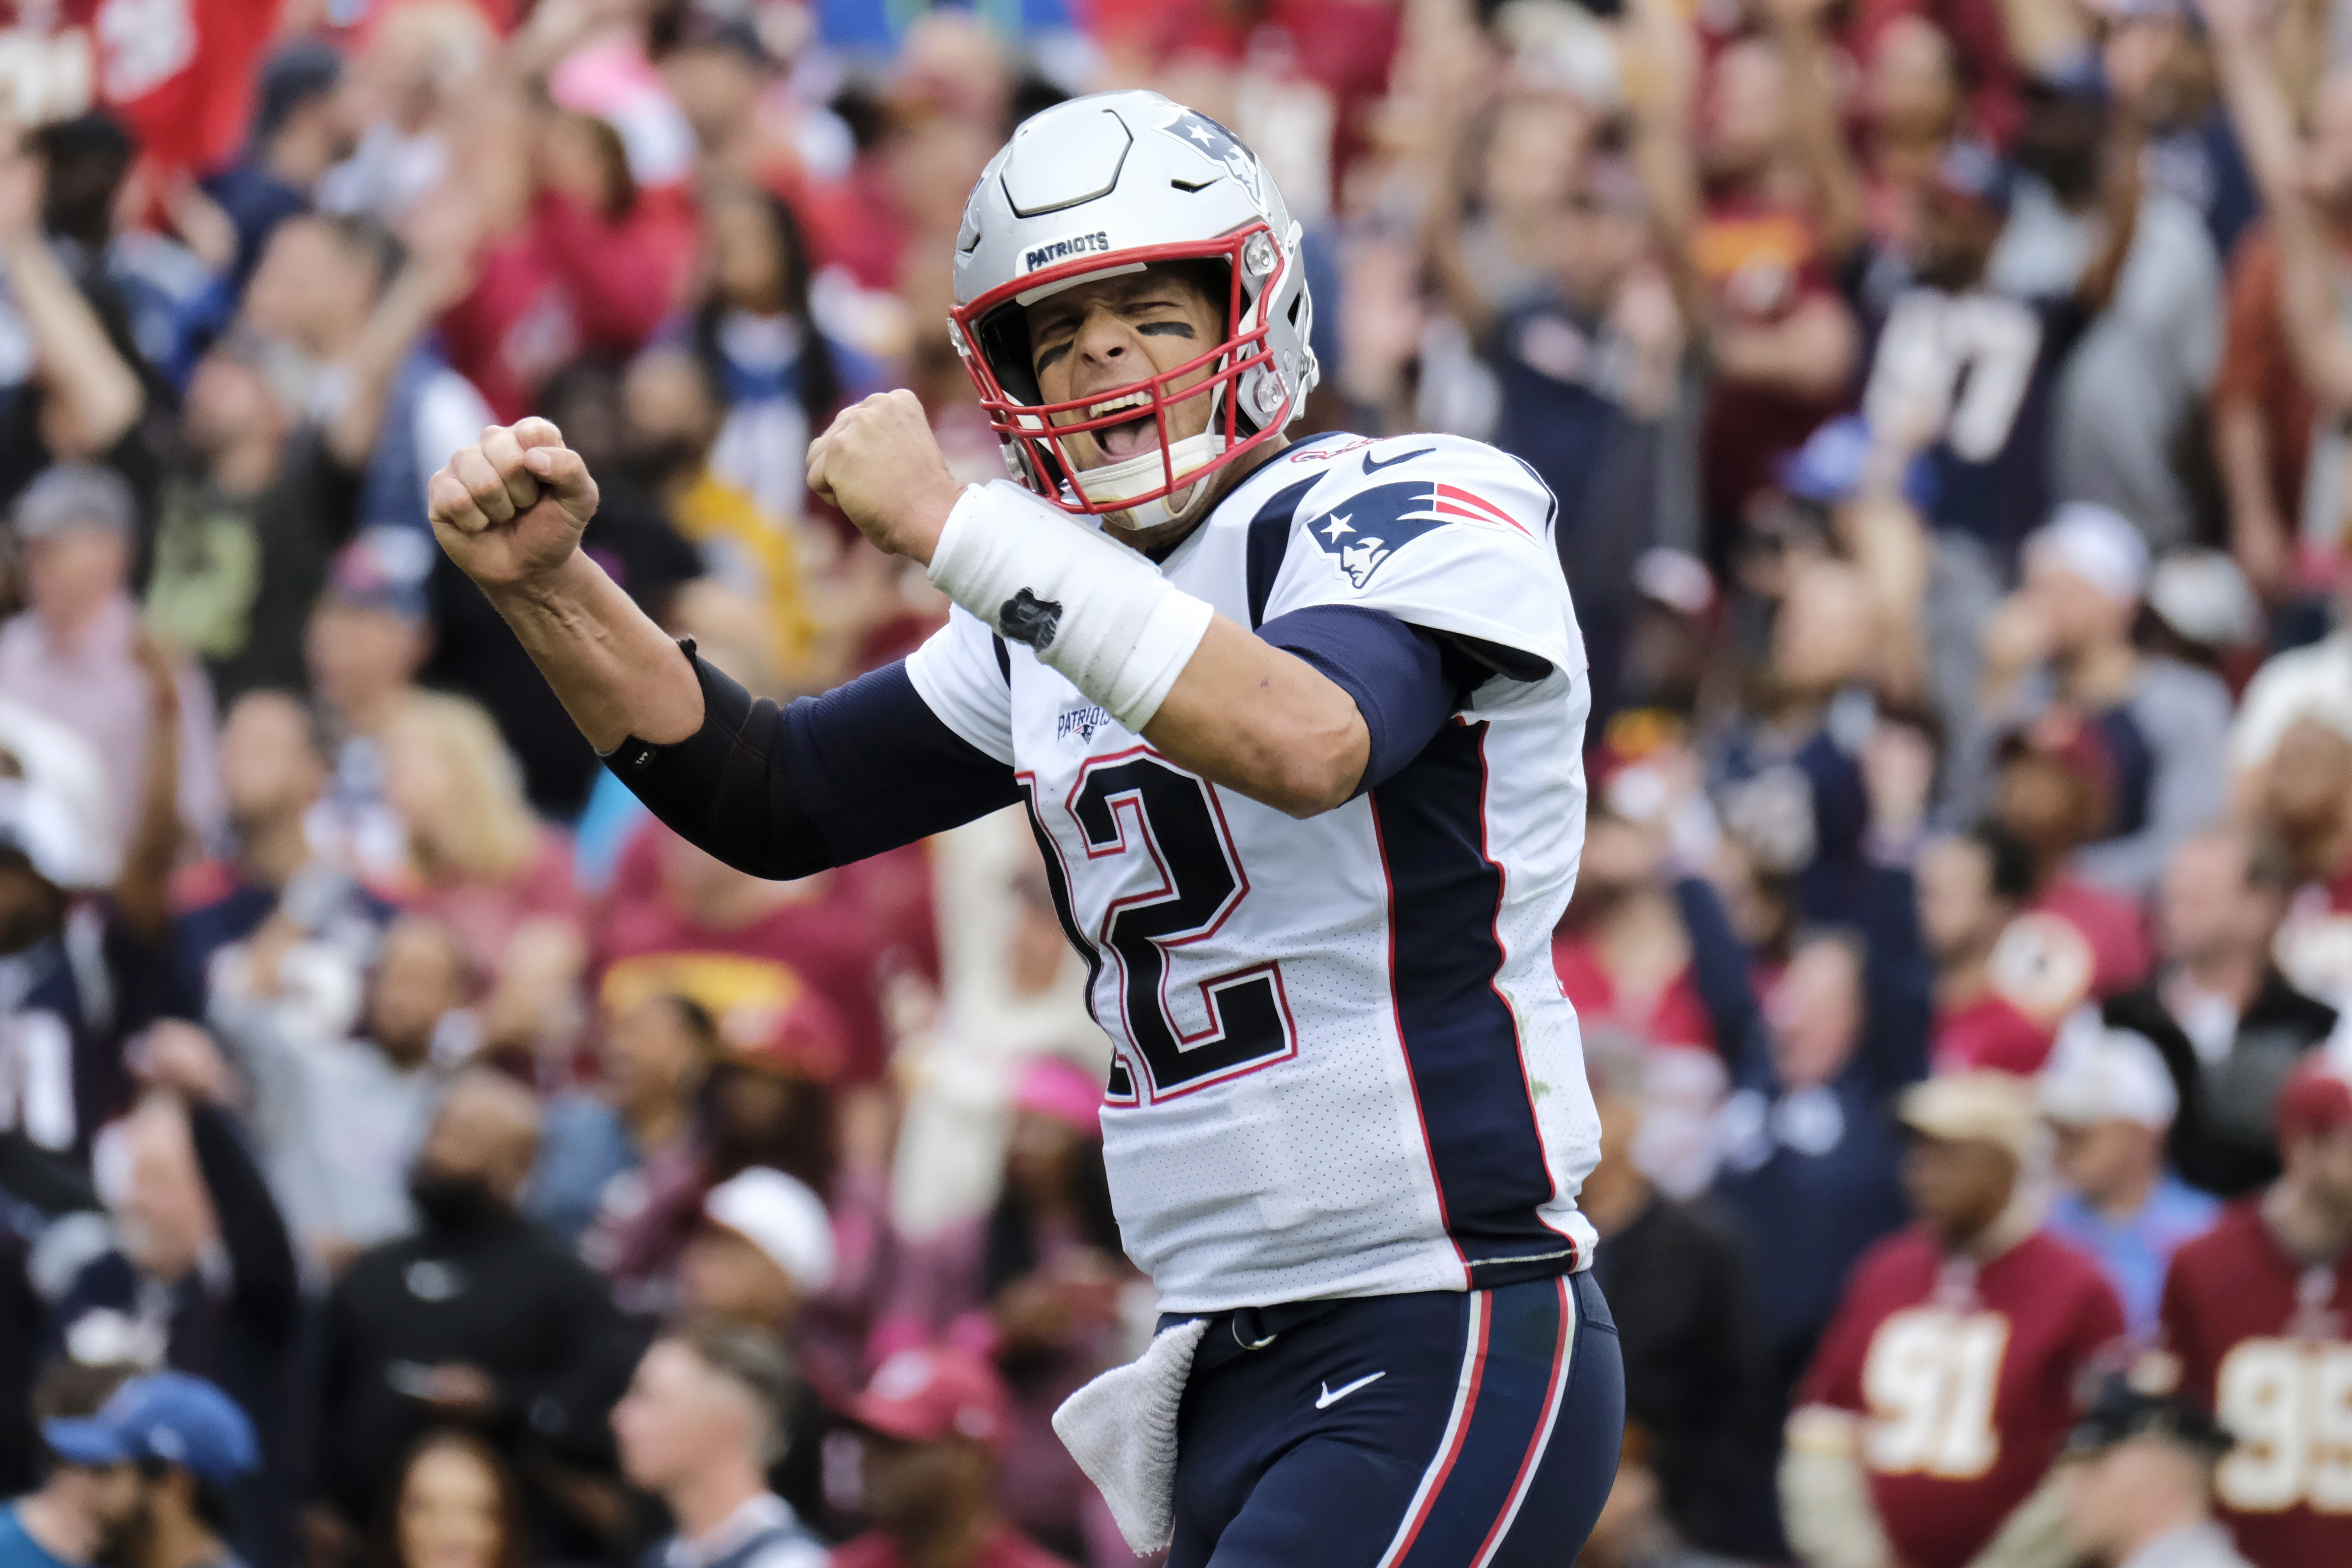 NFL on X: FINAL: The @Patriots have won four out of their last